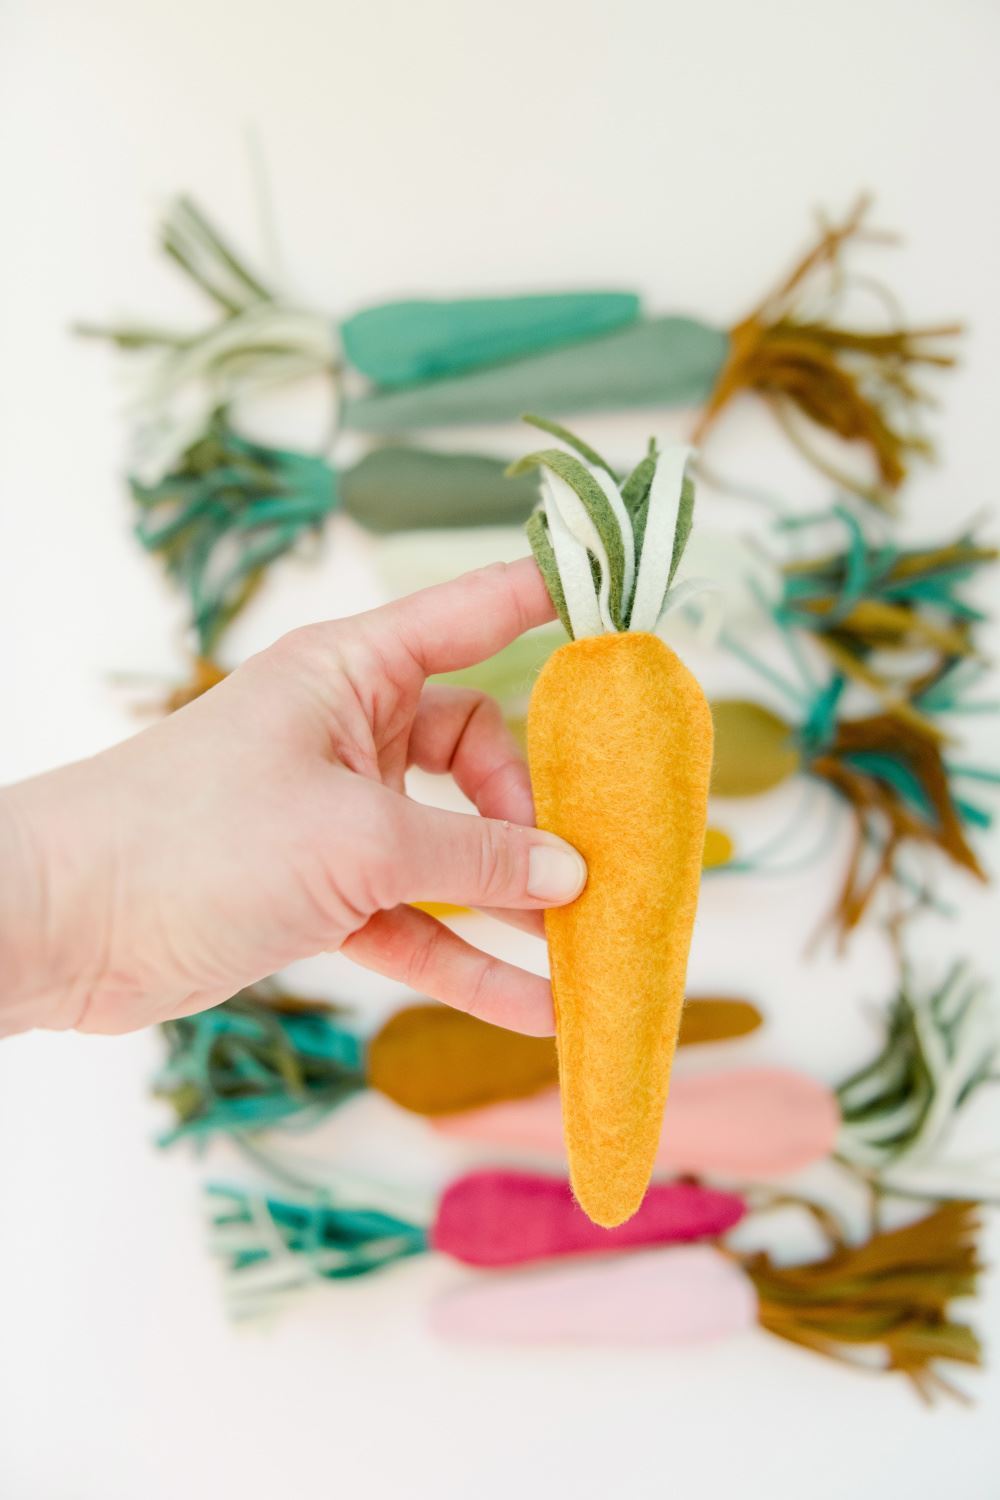 Insert carrot greenery to the top of carrot and press to secure